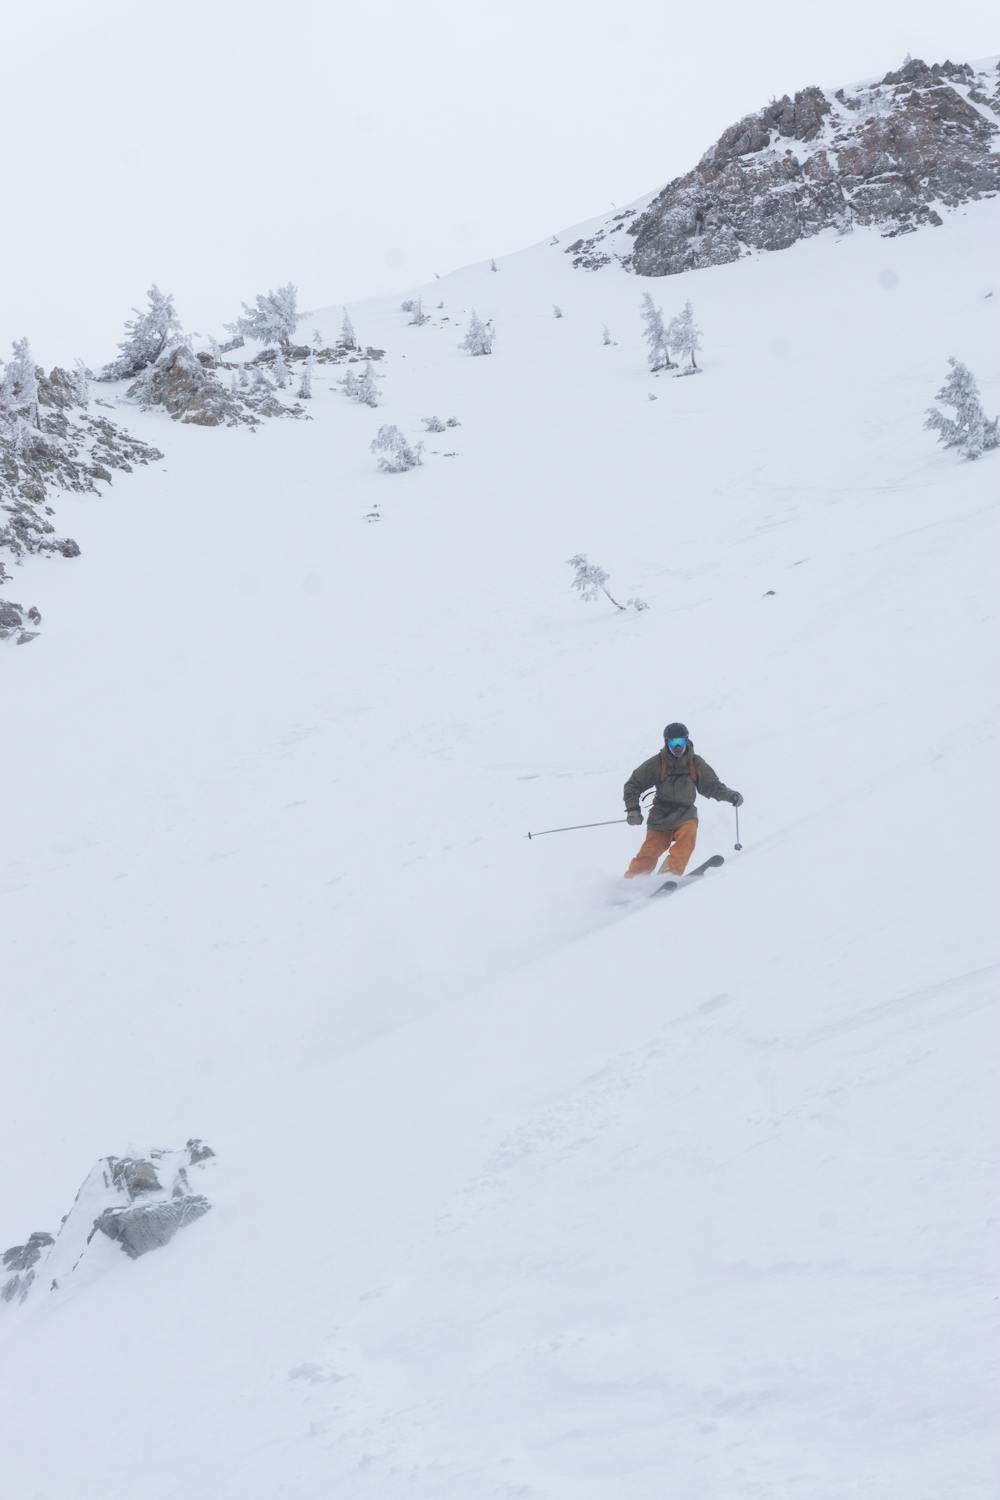 Skiing the open face above the Necklace Couloir.